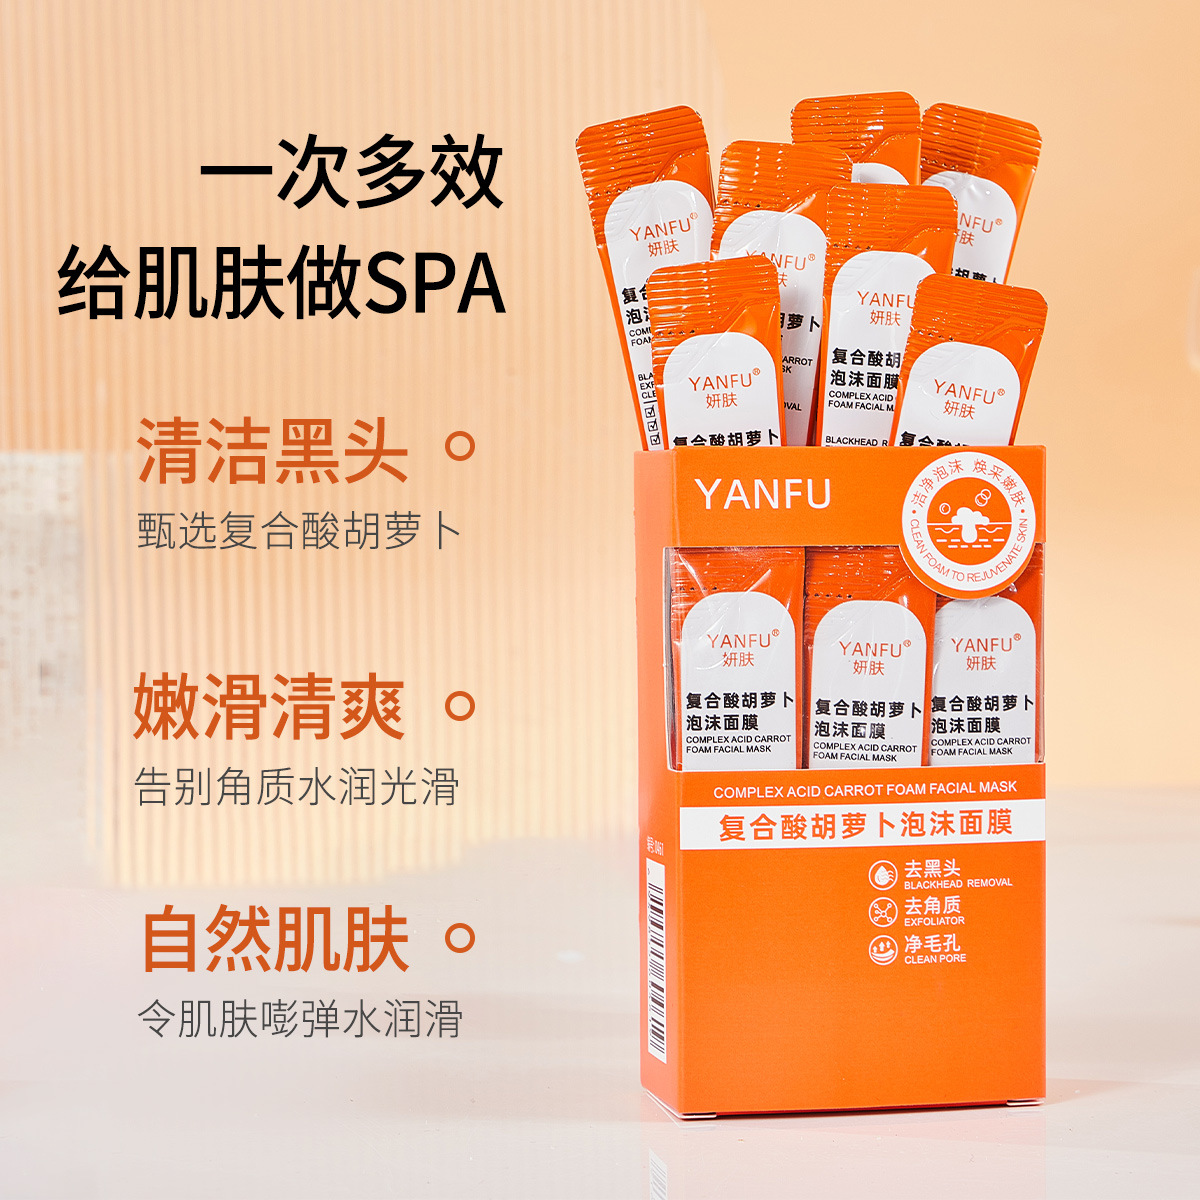 Yan skin compound acid carrot foam coating mask to supplement skin moisture fresh non-sticky independent packaging